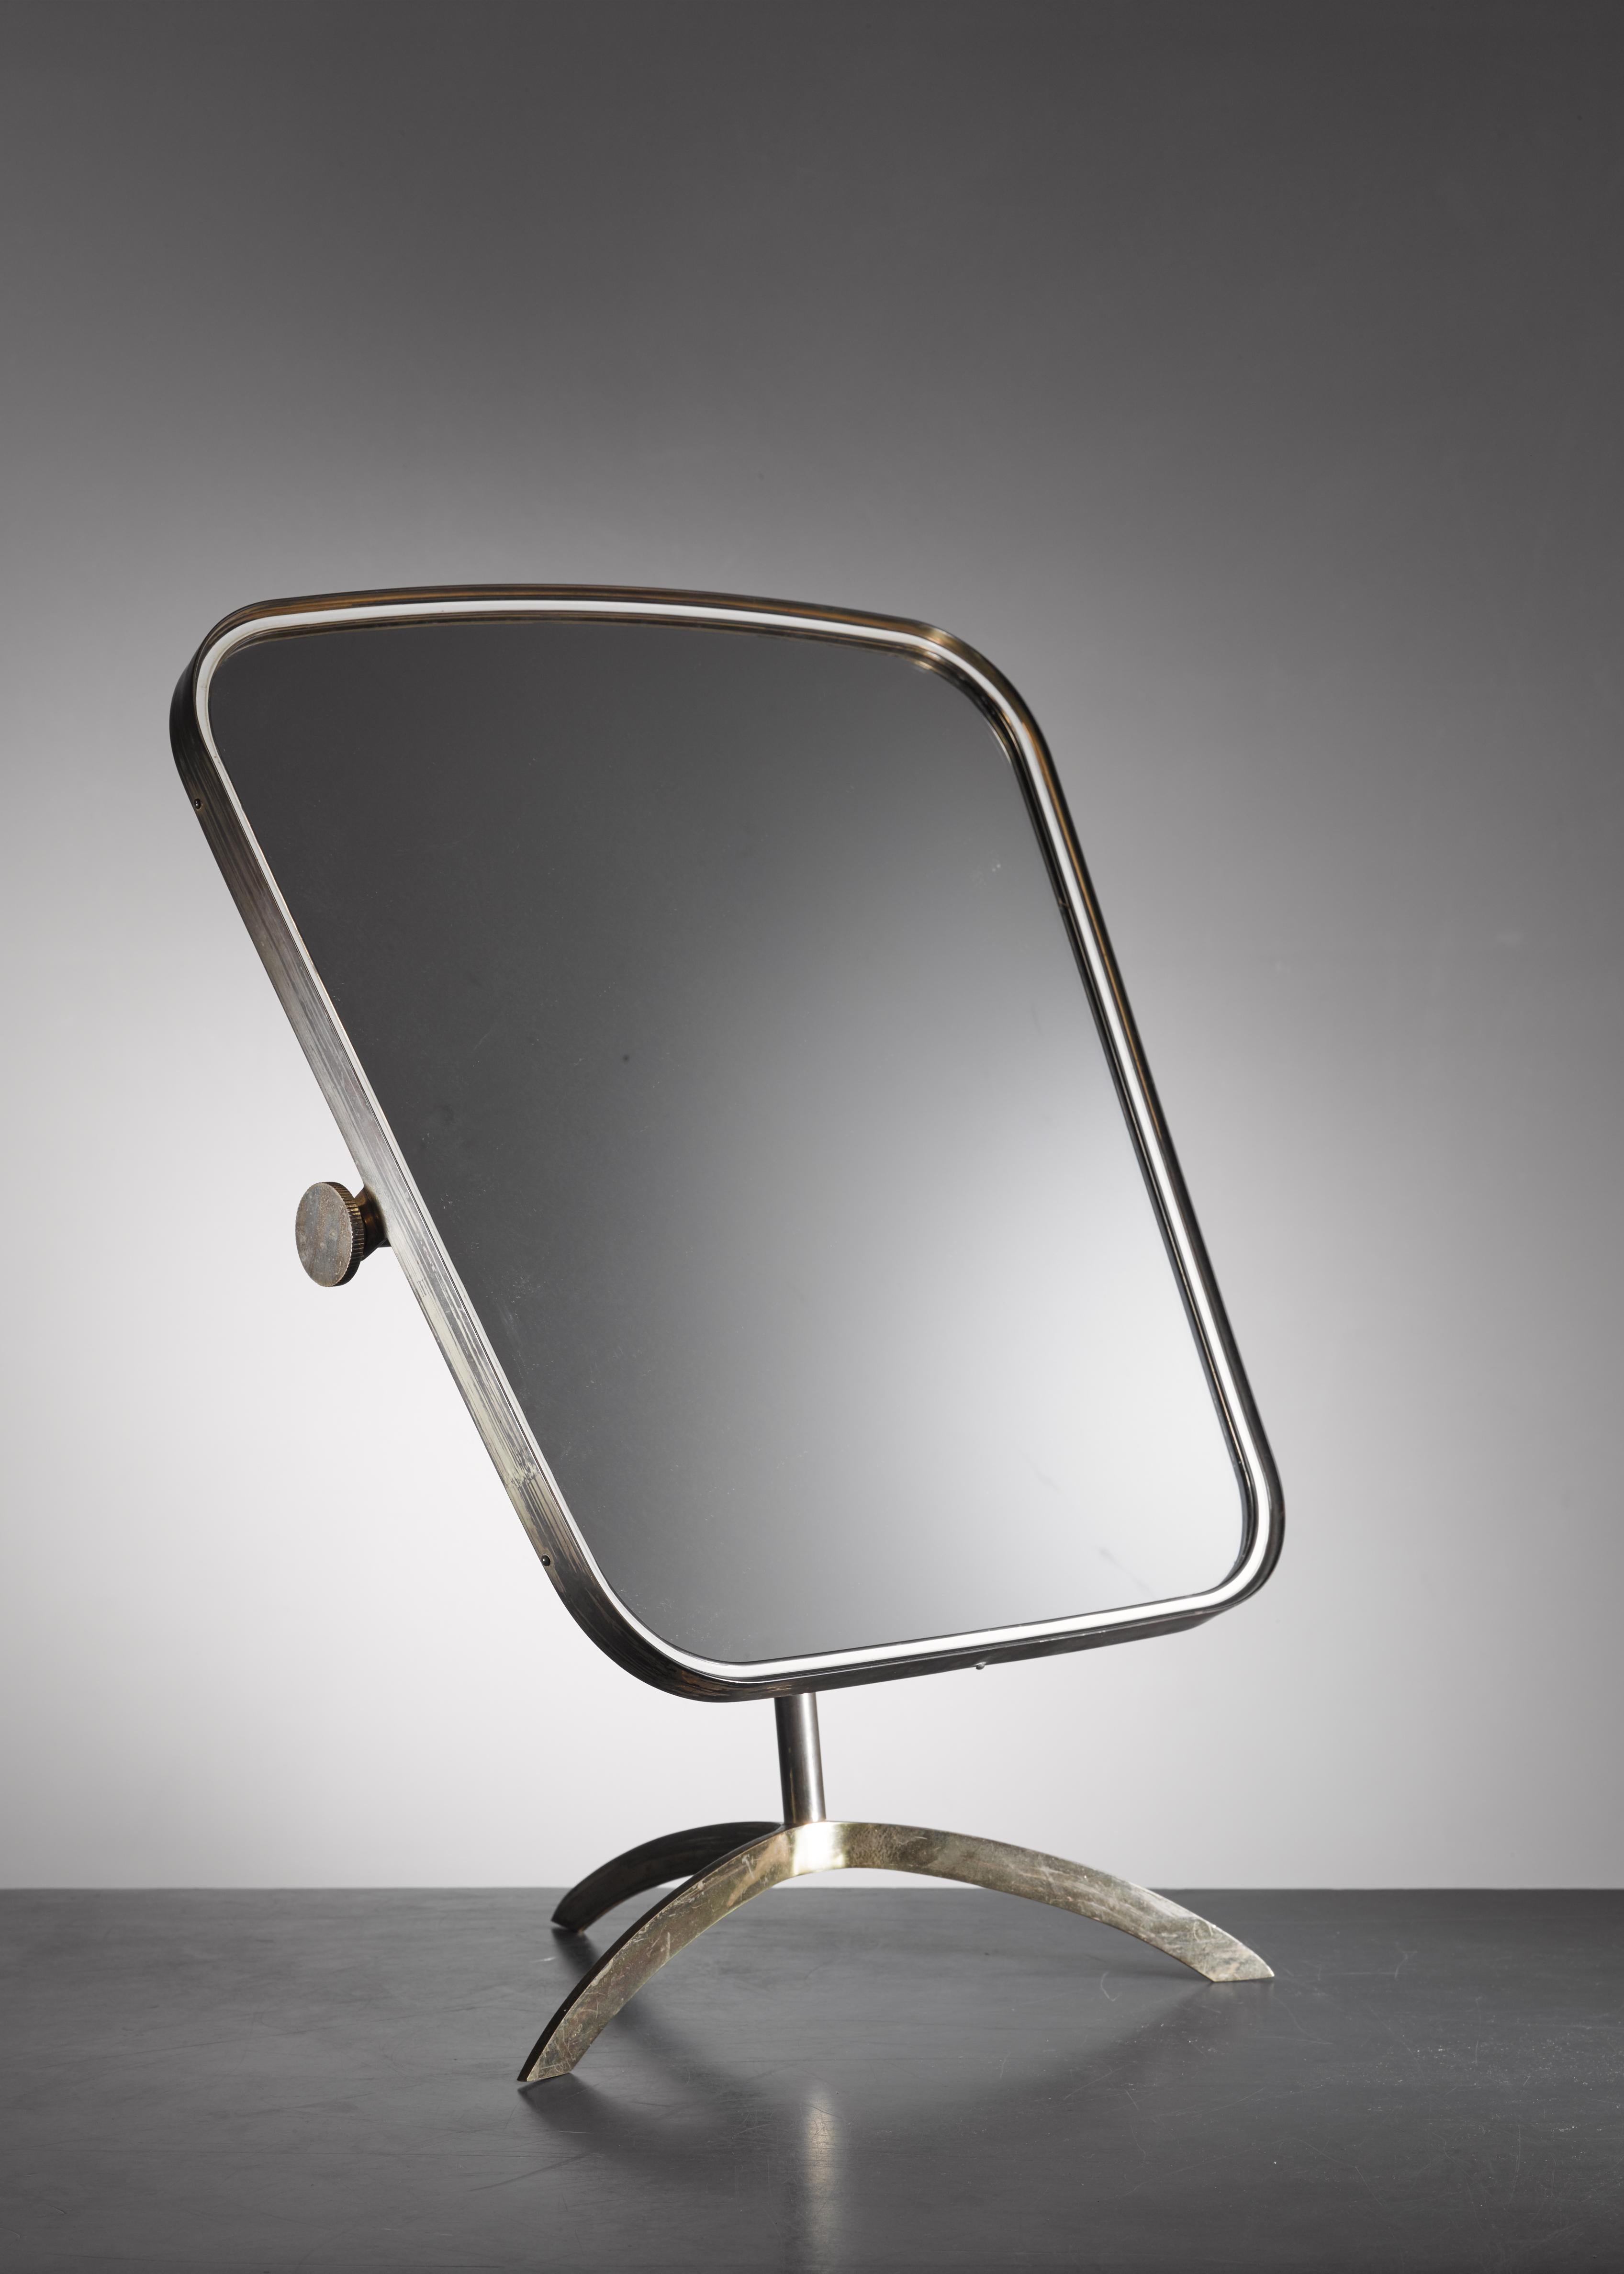 Mid-Century Modern Brass Tilting Console Mirror with White Inside Rim, Germany, 1950s For Sale